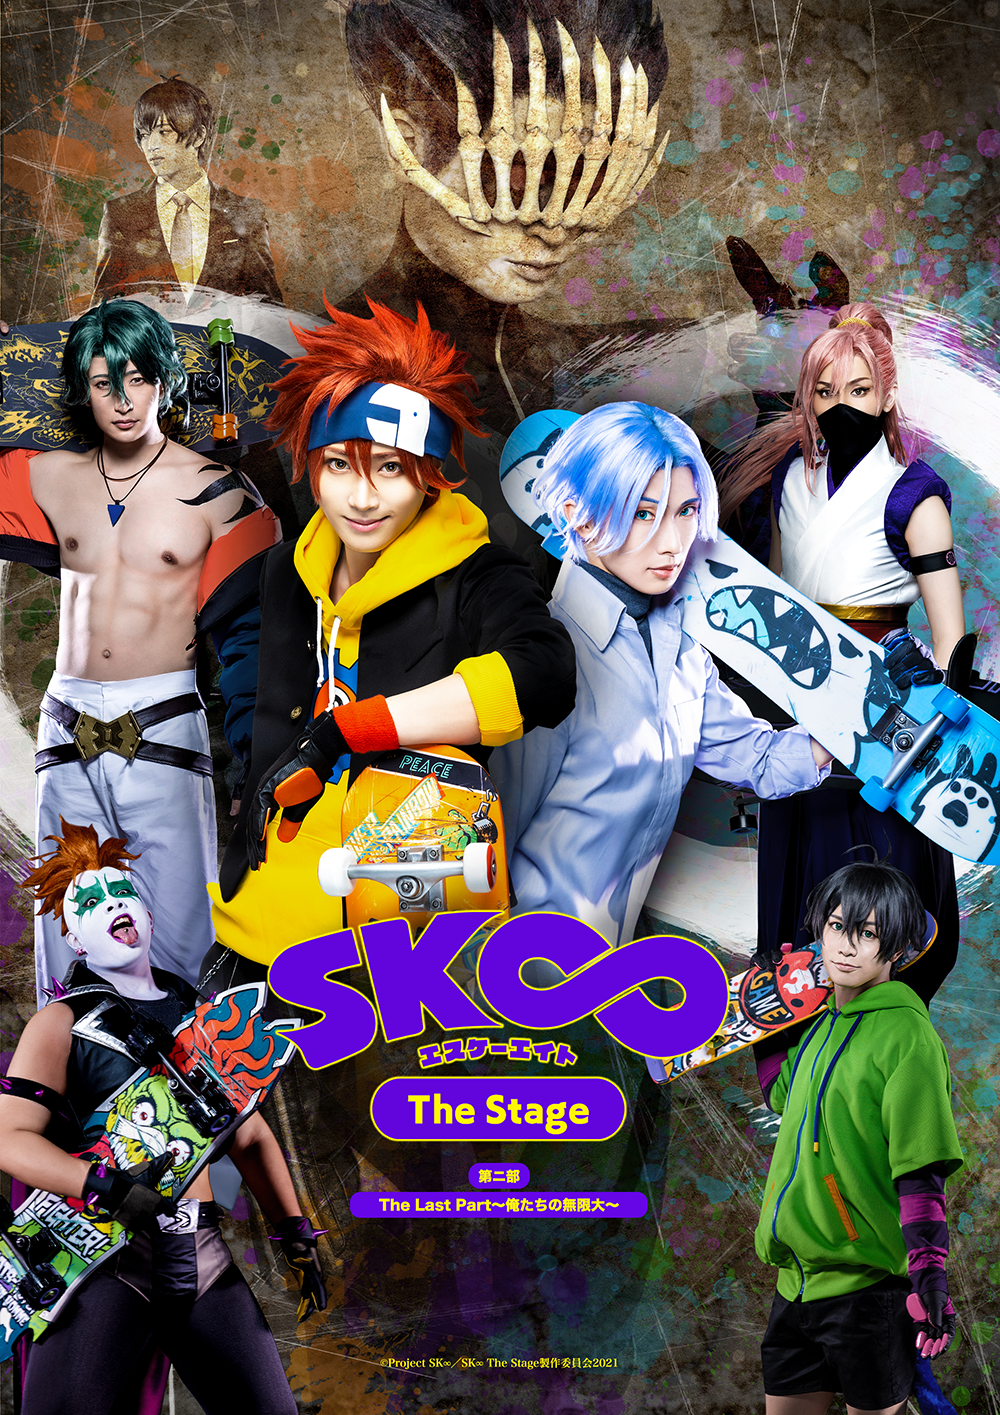 ＳＫ∞ 舞台エスケーエイト THE STAGE 2部